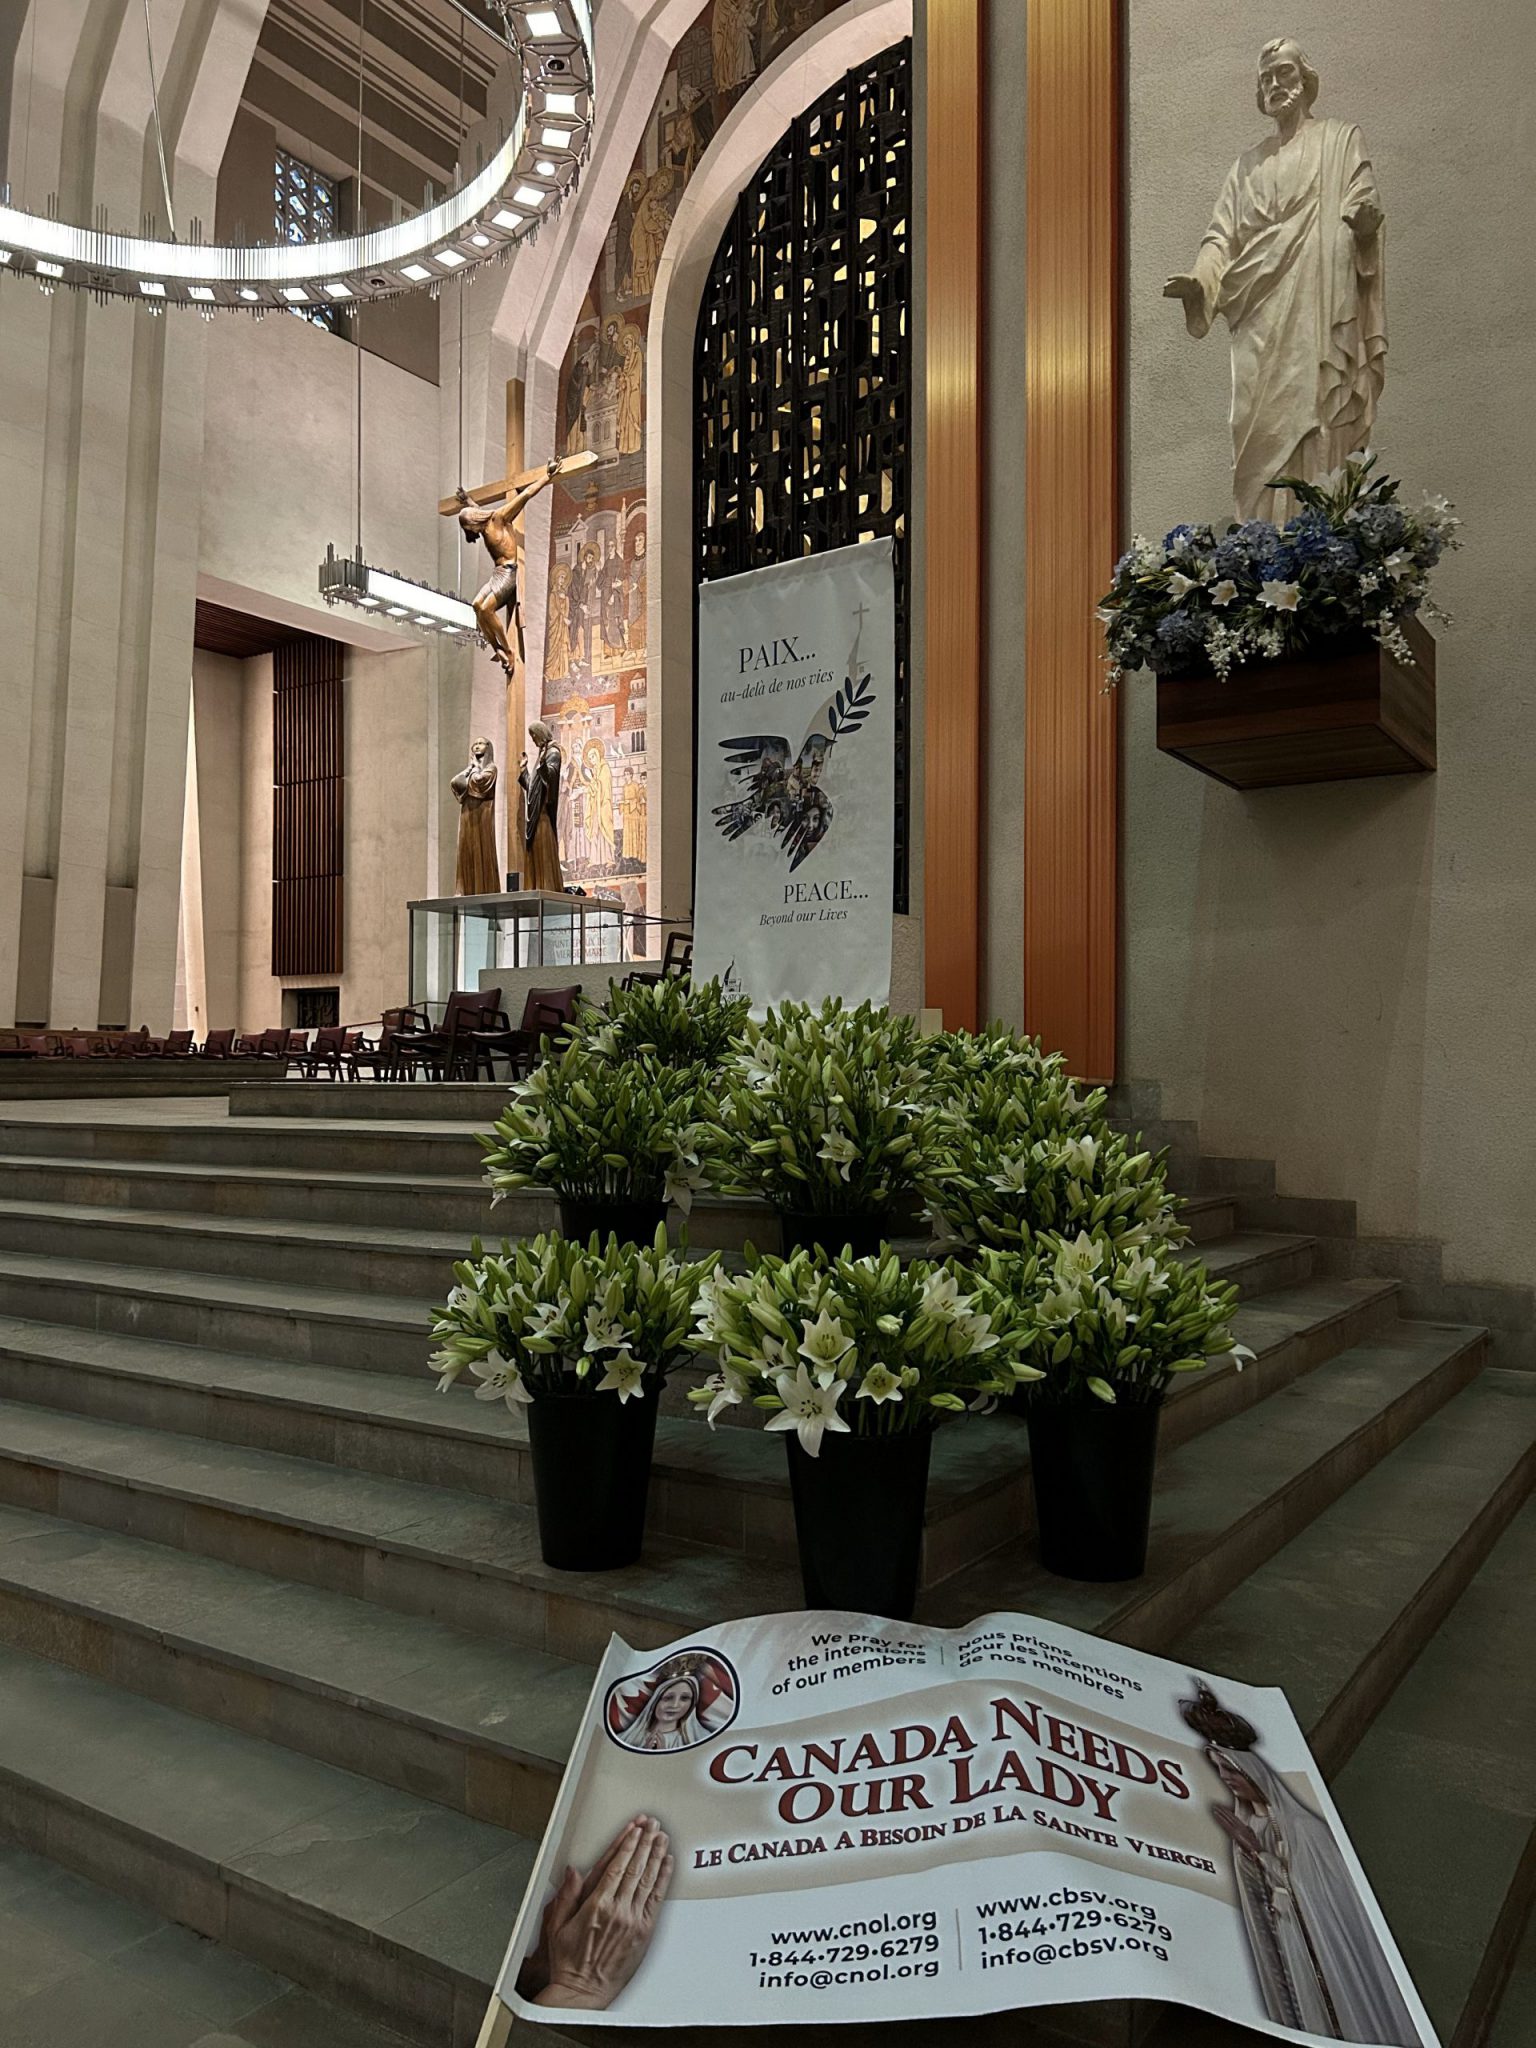 On March 19th, 2024, in celebration of the 400th anniversary of the dedication of St. Joseph as the patron saint of Canada, friends and staff of Canada Needs Our Lady were blessed to deliver your petitions and lilies to Saint Joseph, at Canada’s most cherished Saint Joseph’s Oratory, which was founded by Saint Brother André in 1904. We are grateful to the staff of Saint Joseph’s Oratory for receiving us with such kindness and for allowing us to bestow our beautiful lilies to Saint Joseph throughout the oratory.